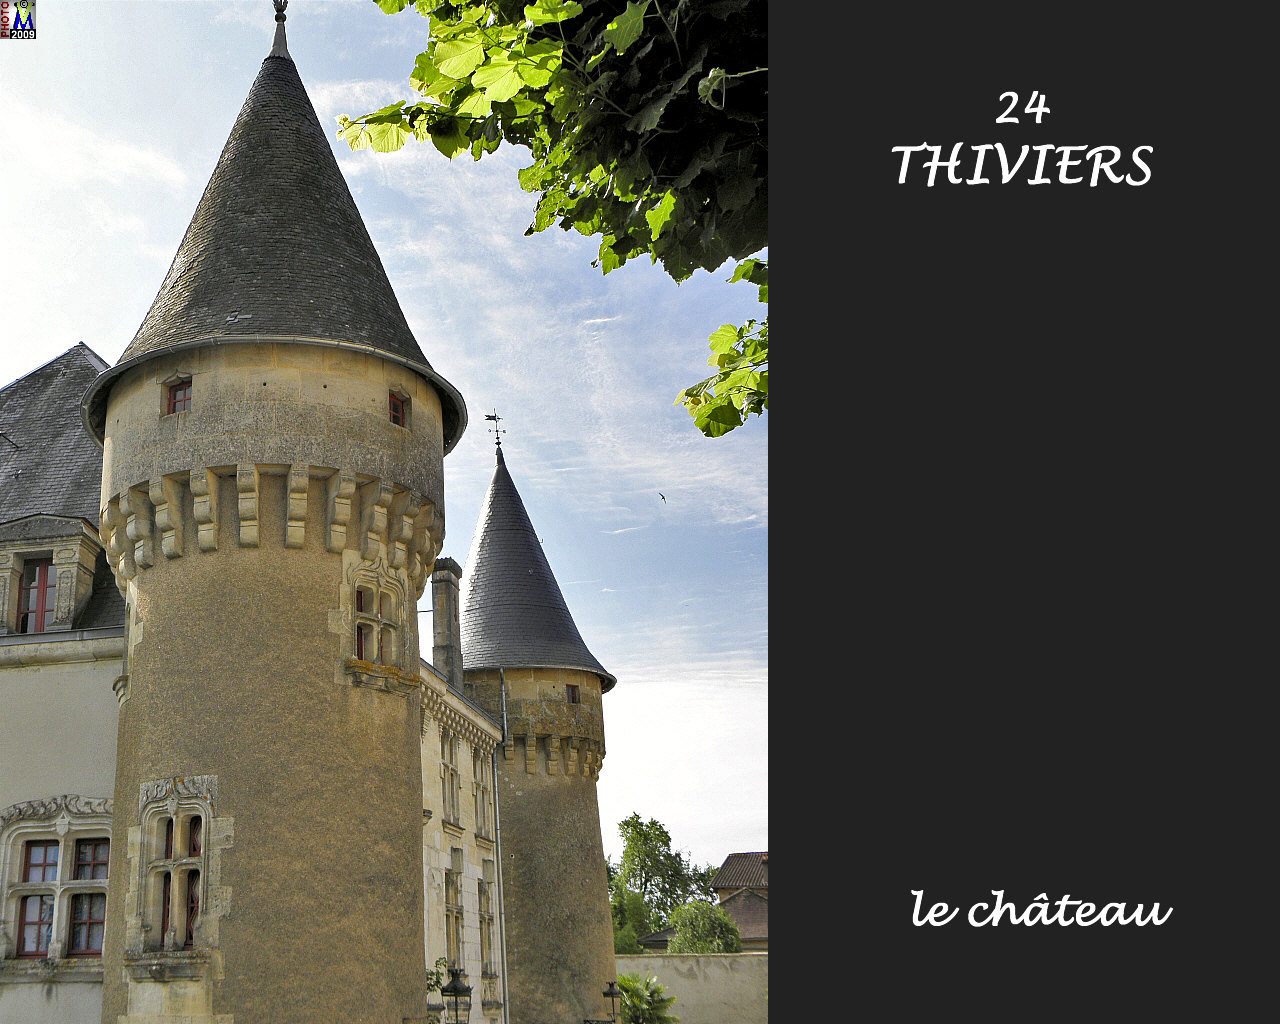 24THIVIERS_chateau_106.jpg